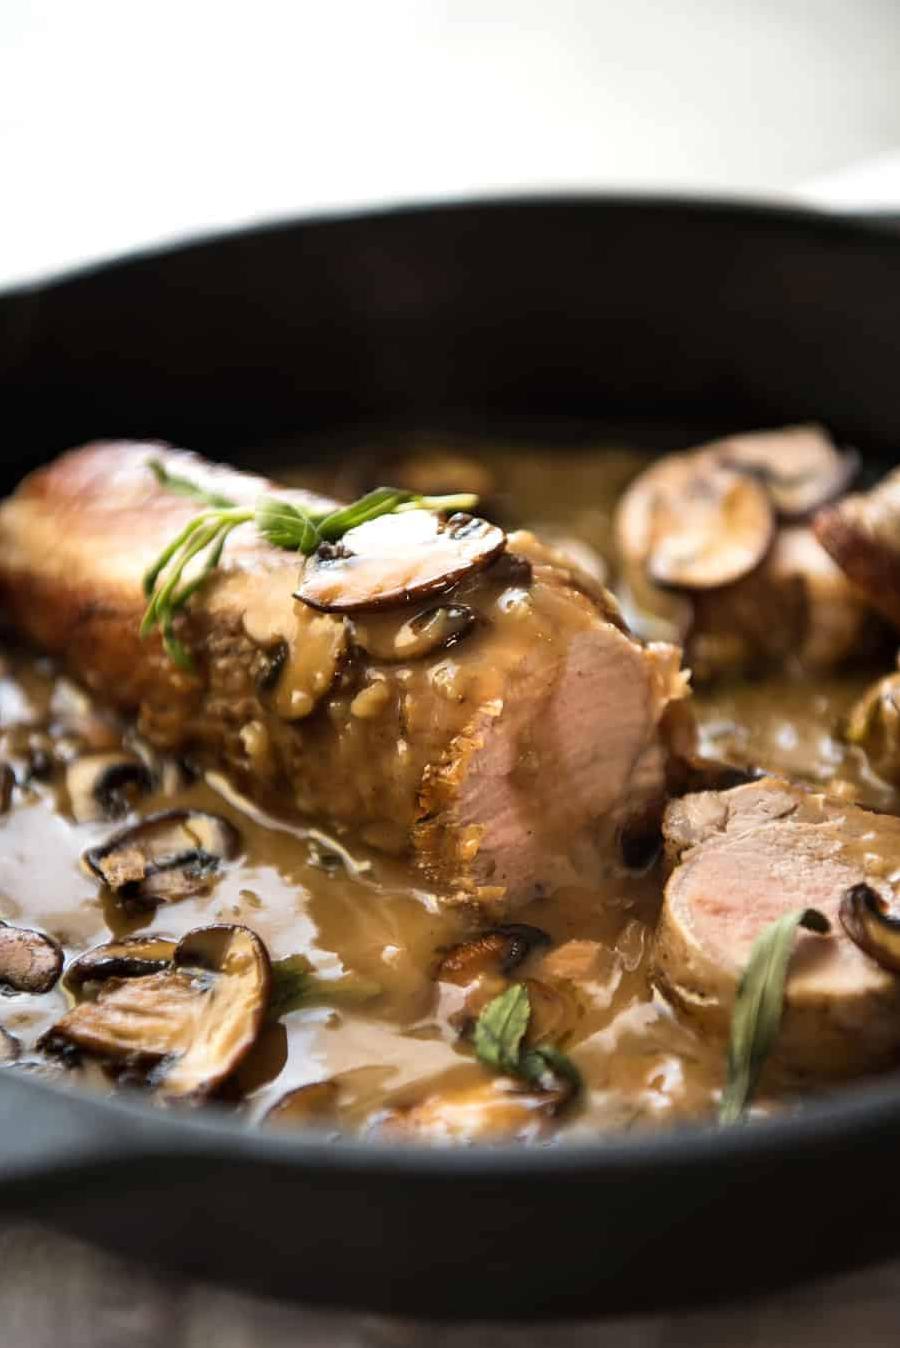  Stuffed with savory mushrooms and port wine, this pork tenderloin embodies an indulgent meal